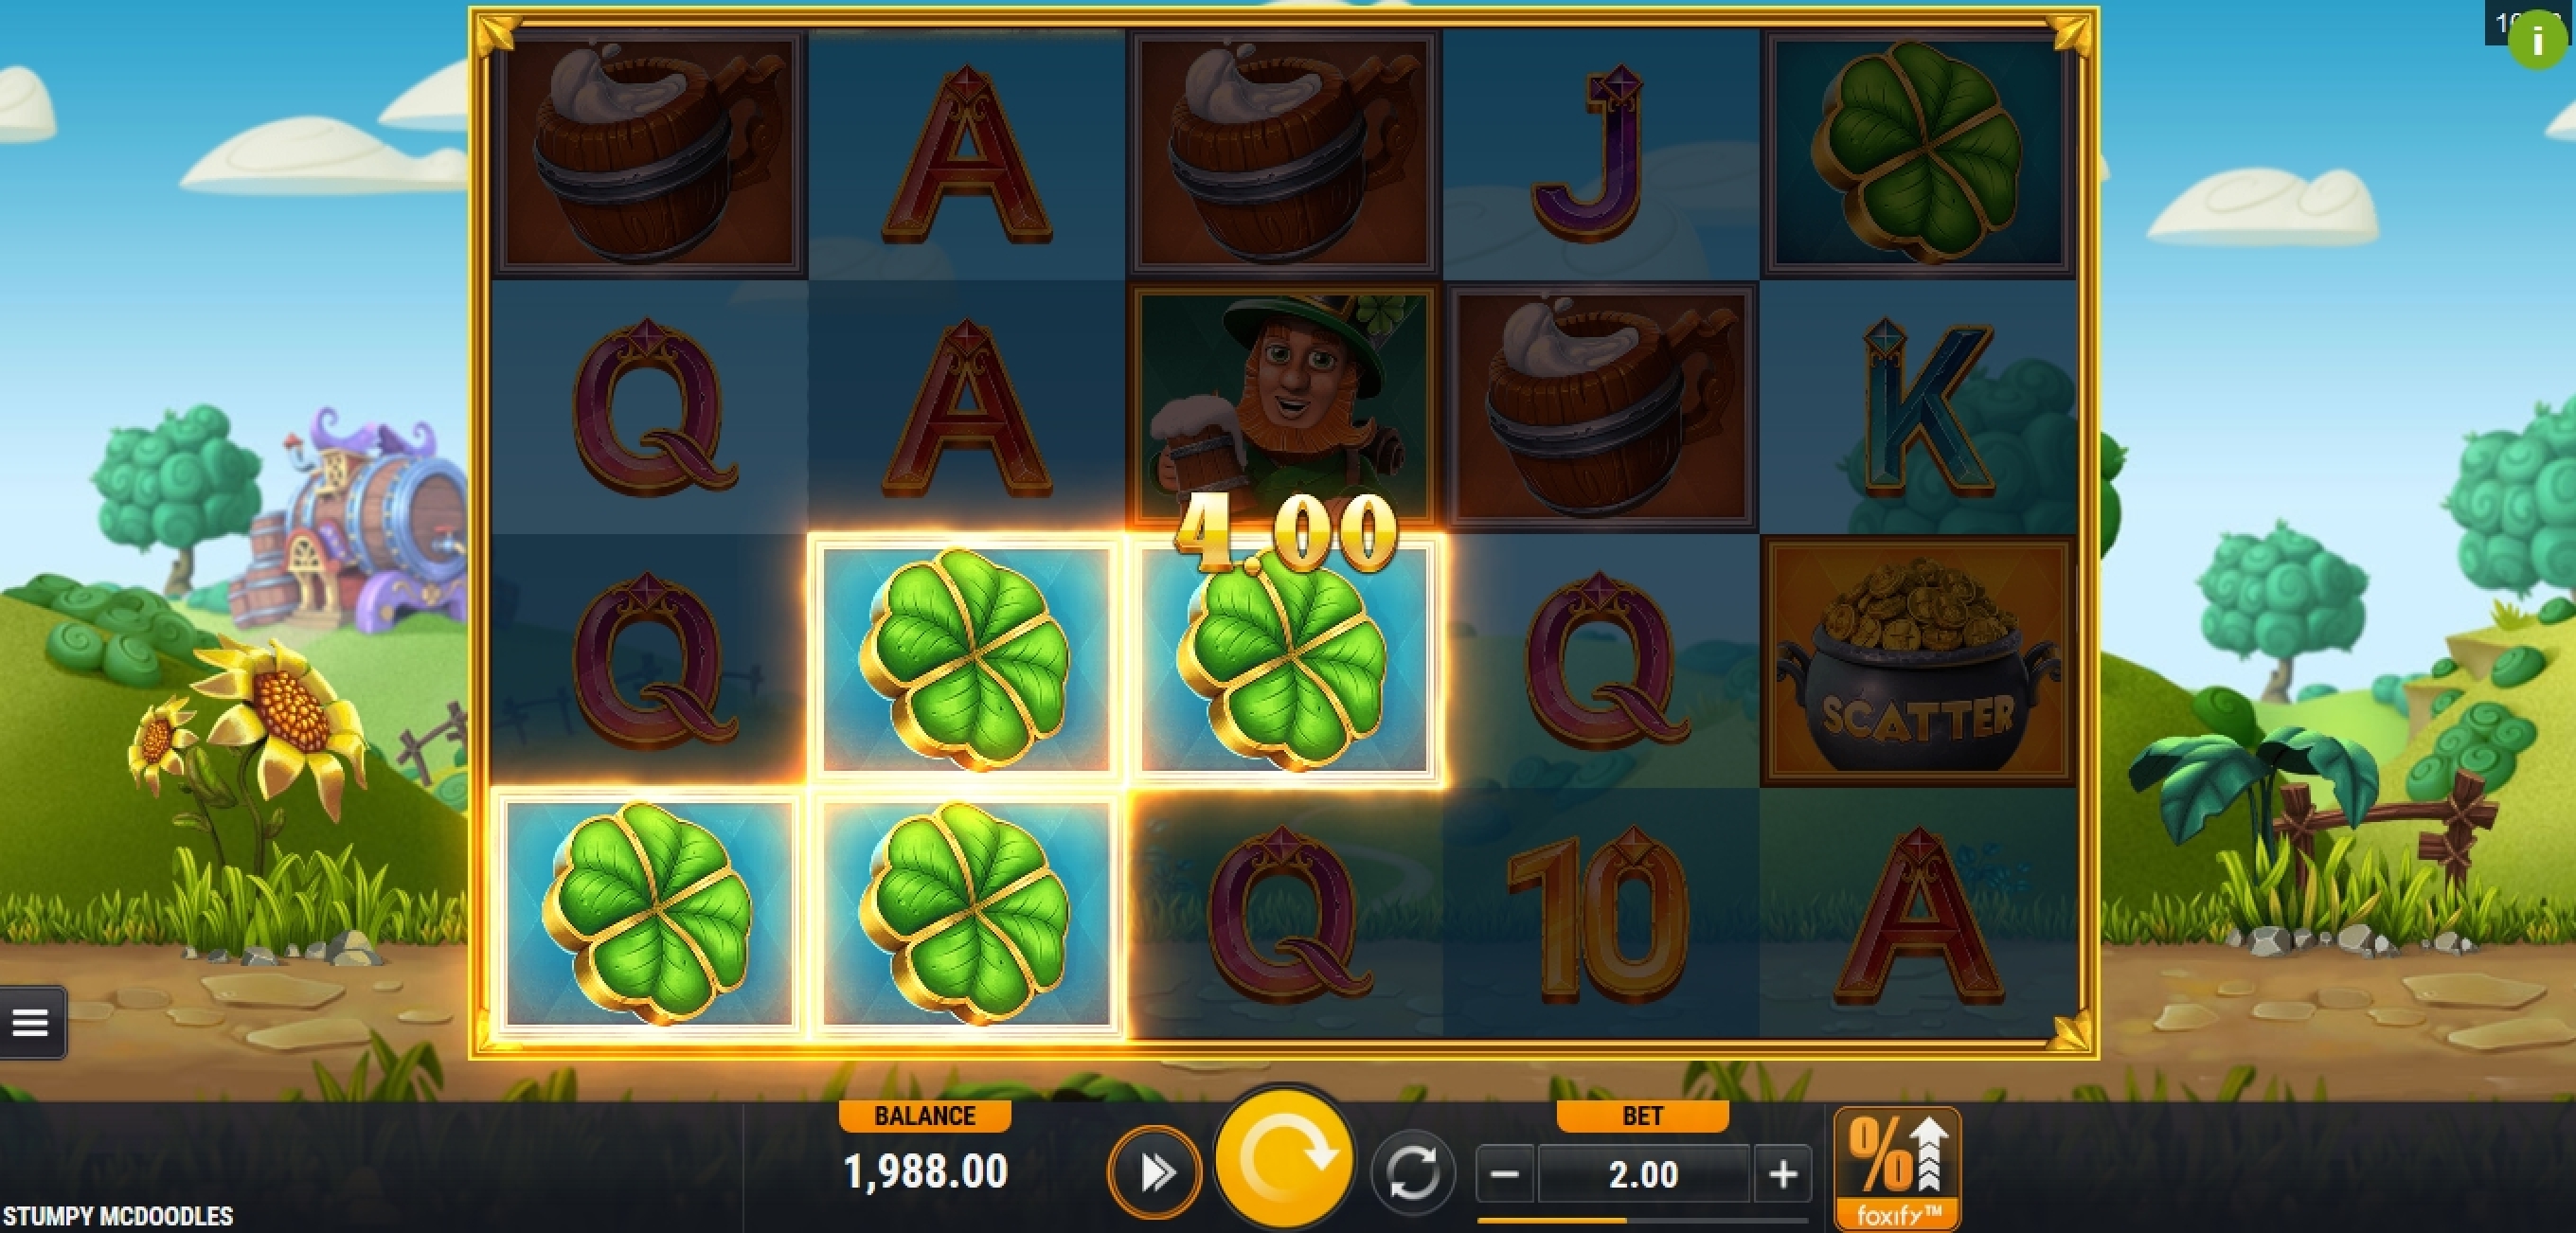 Win Money in Stumpy McDoodles Free Slot Game by Foxium